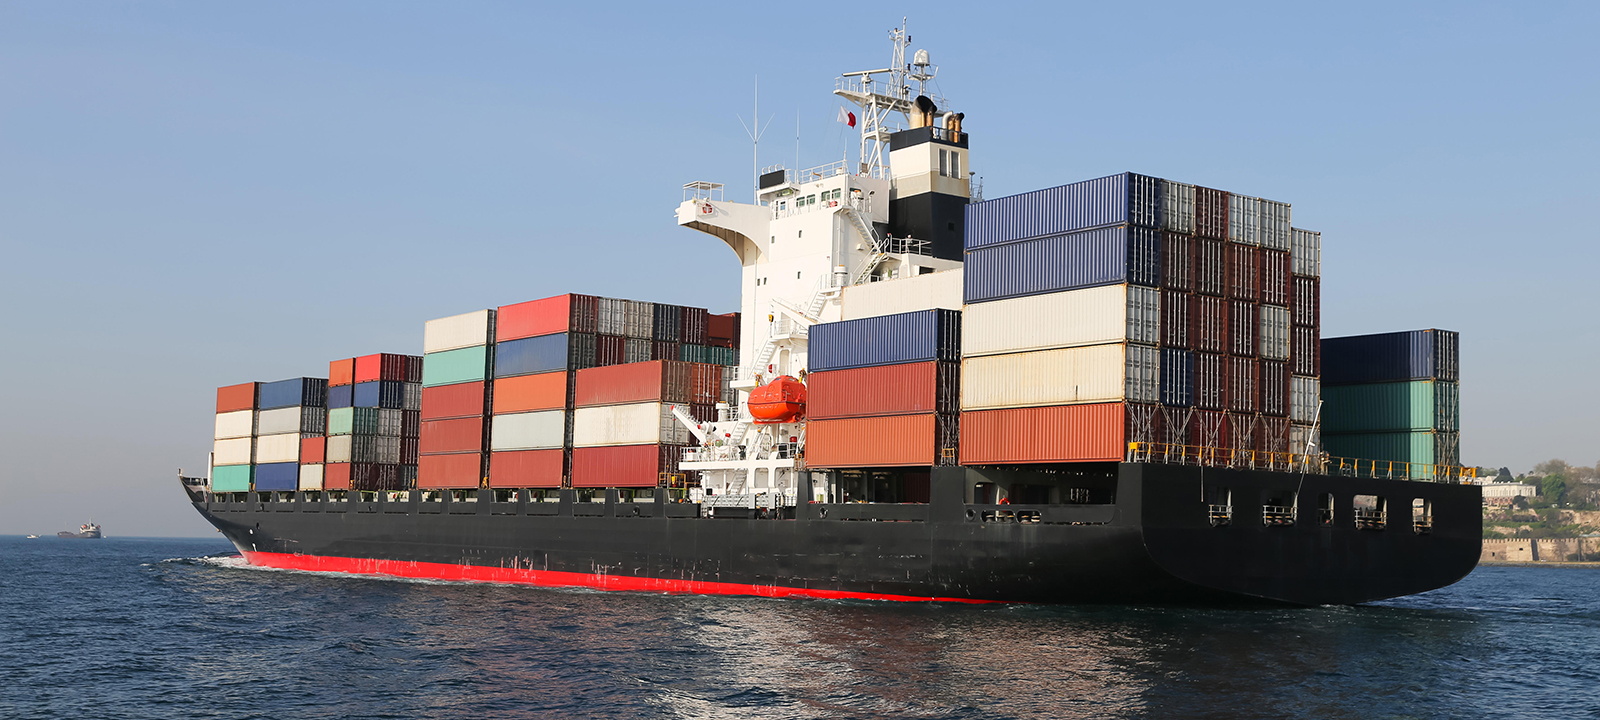 T46P0M A container ship carrying goods between ports